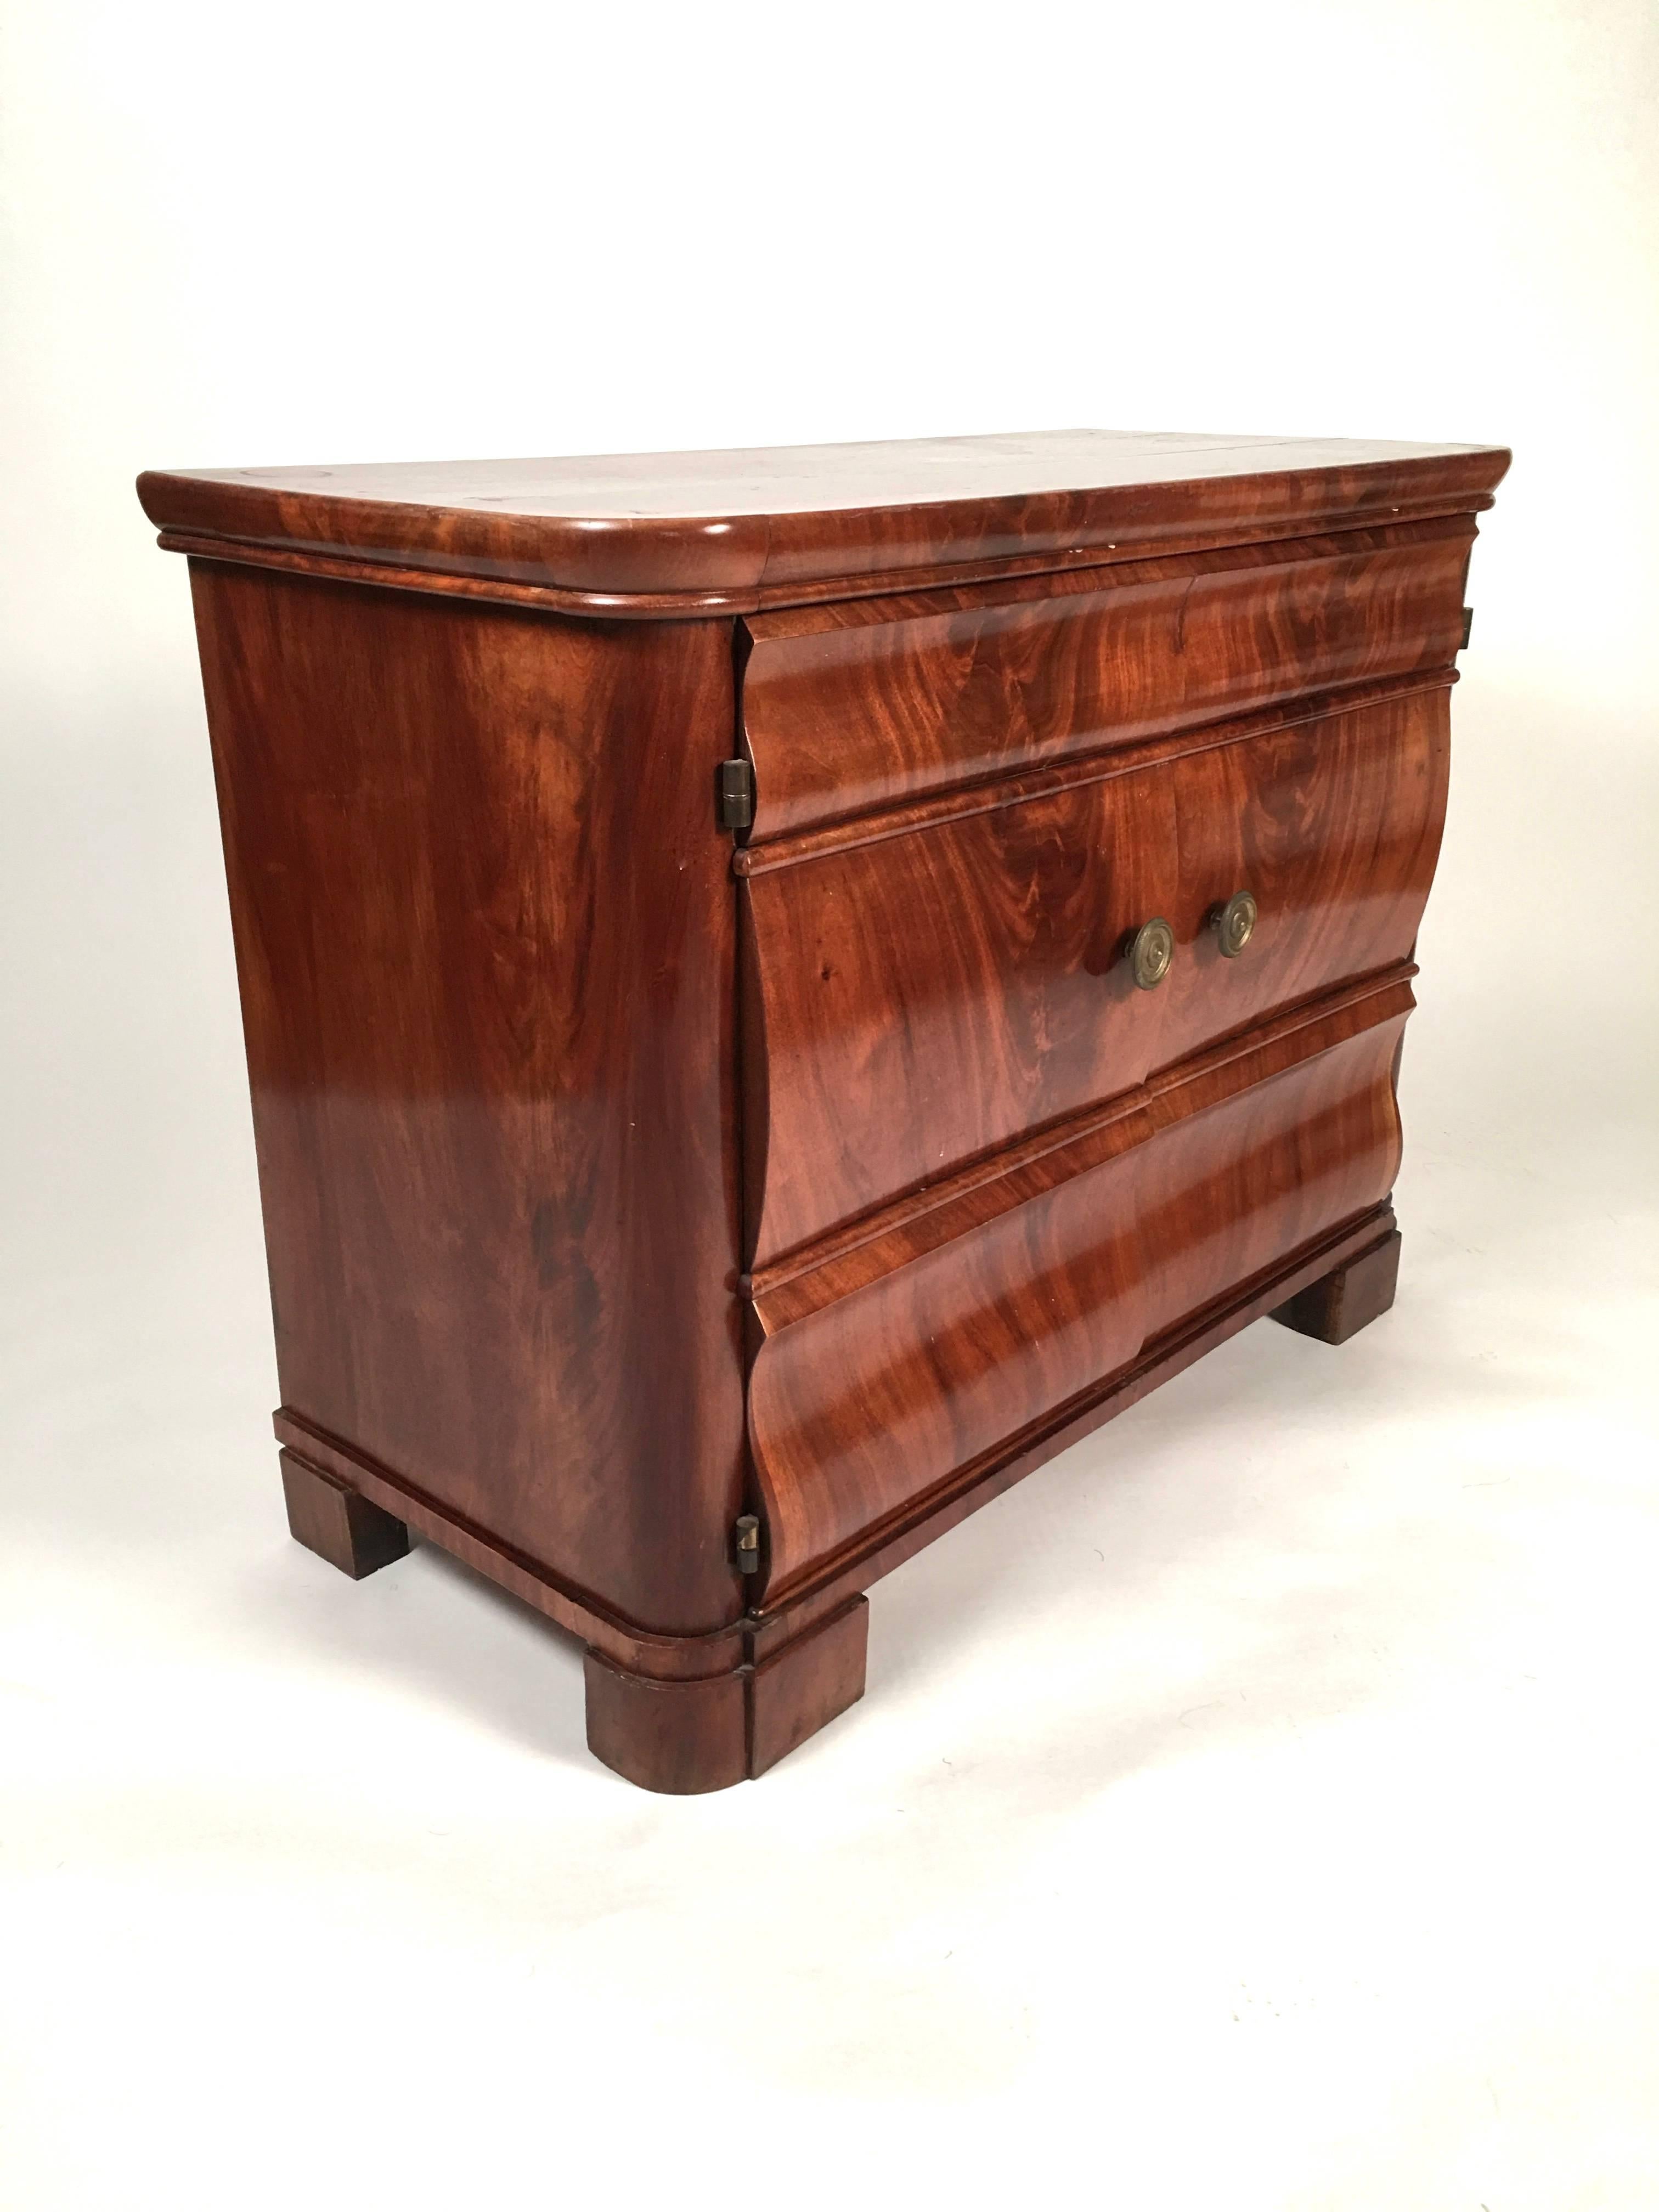 A Biedermeier mahogany two door side cabinet, of wonderful small scale, the serpentine carved doors in richly figured mahogany, with 2 brass neoclassical round door pulls, the rectangular top with curved corners, all raised on bracket feet.